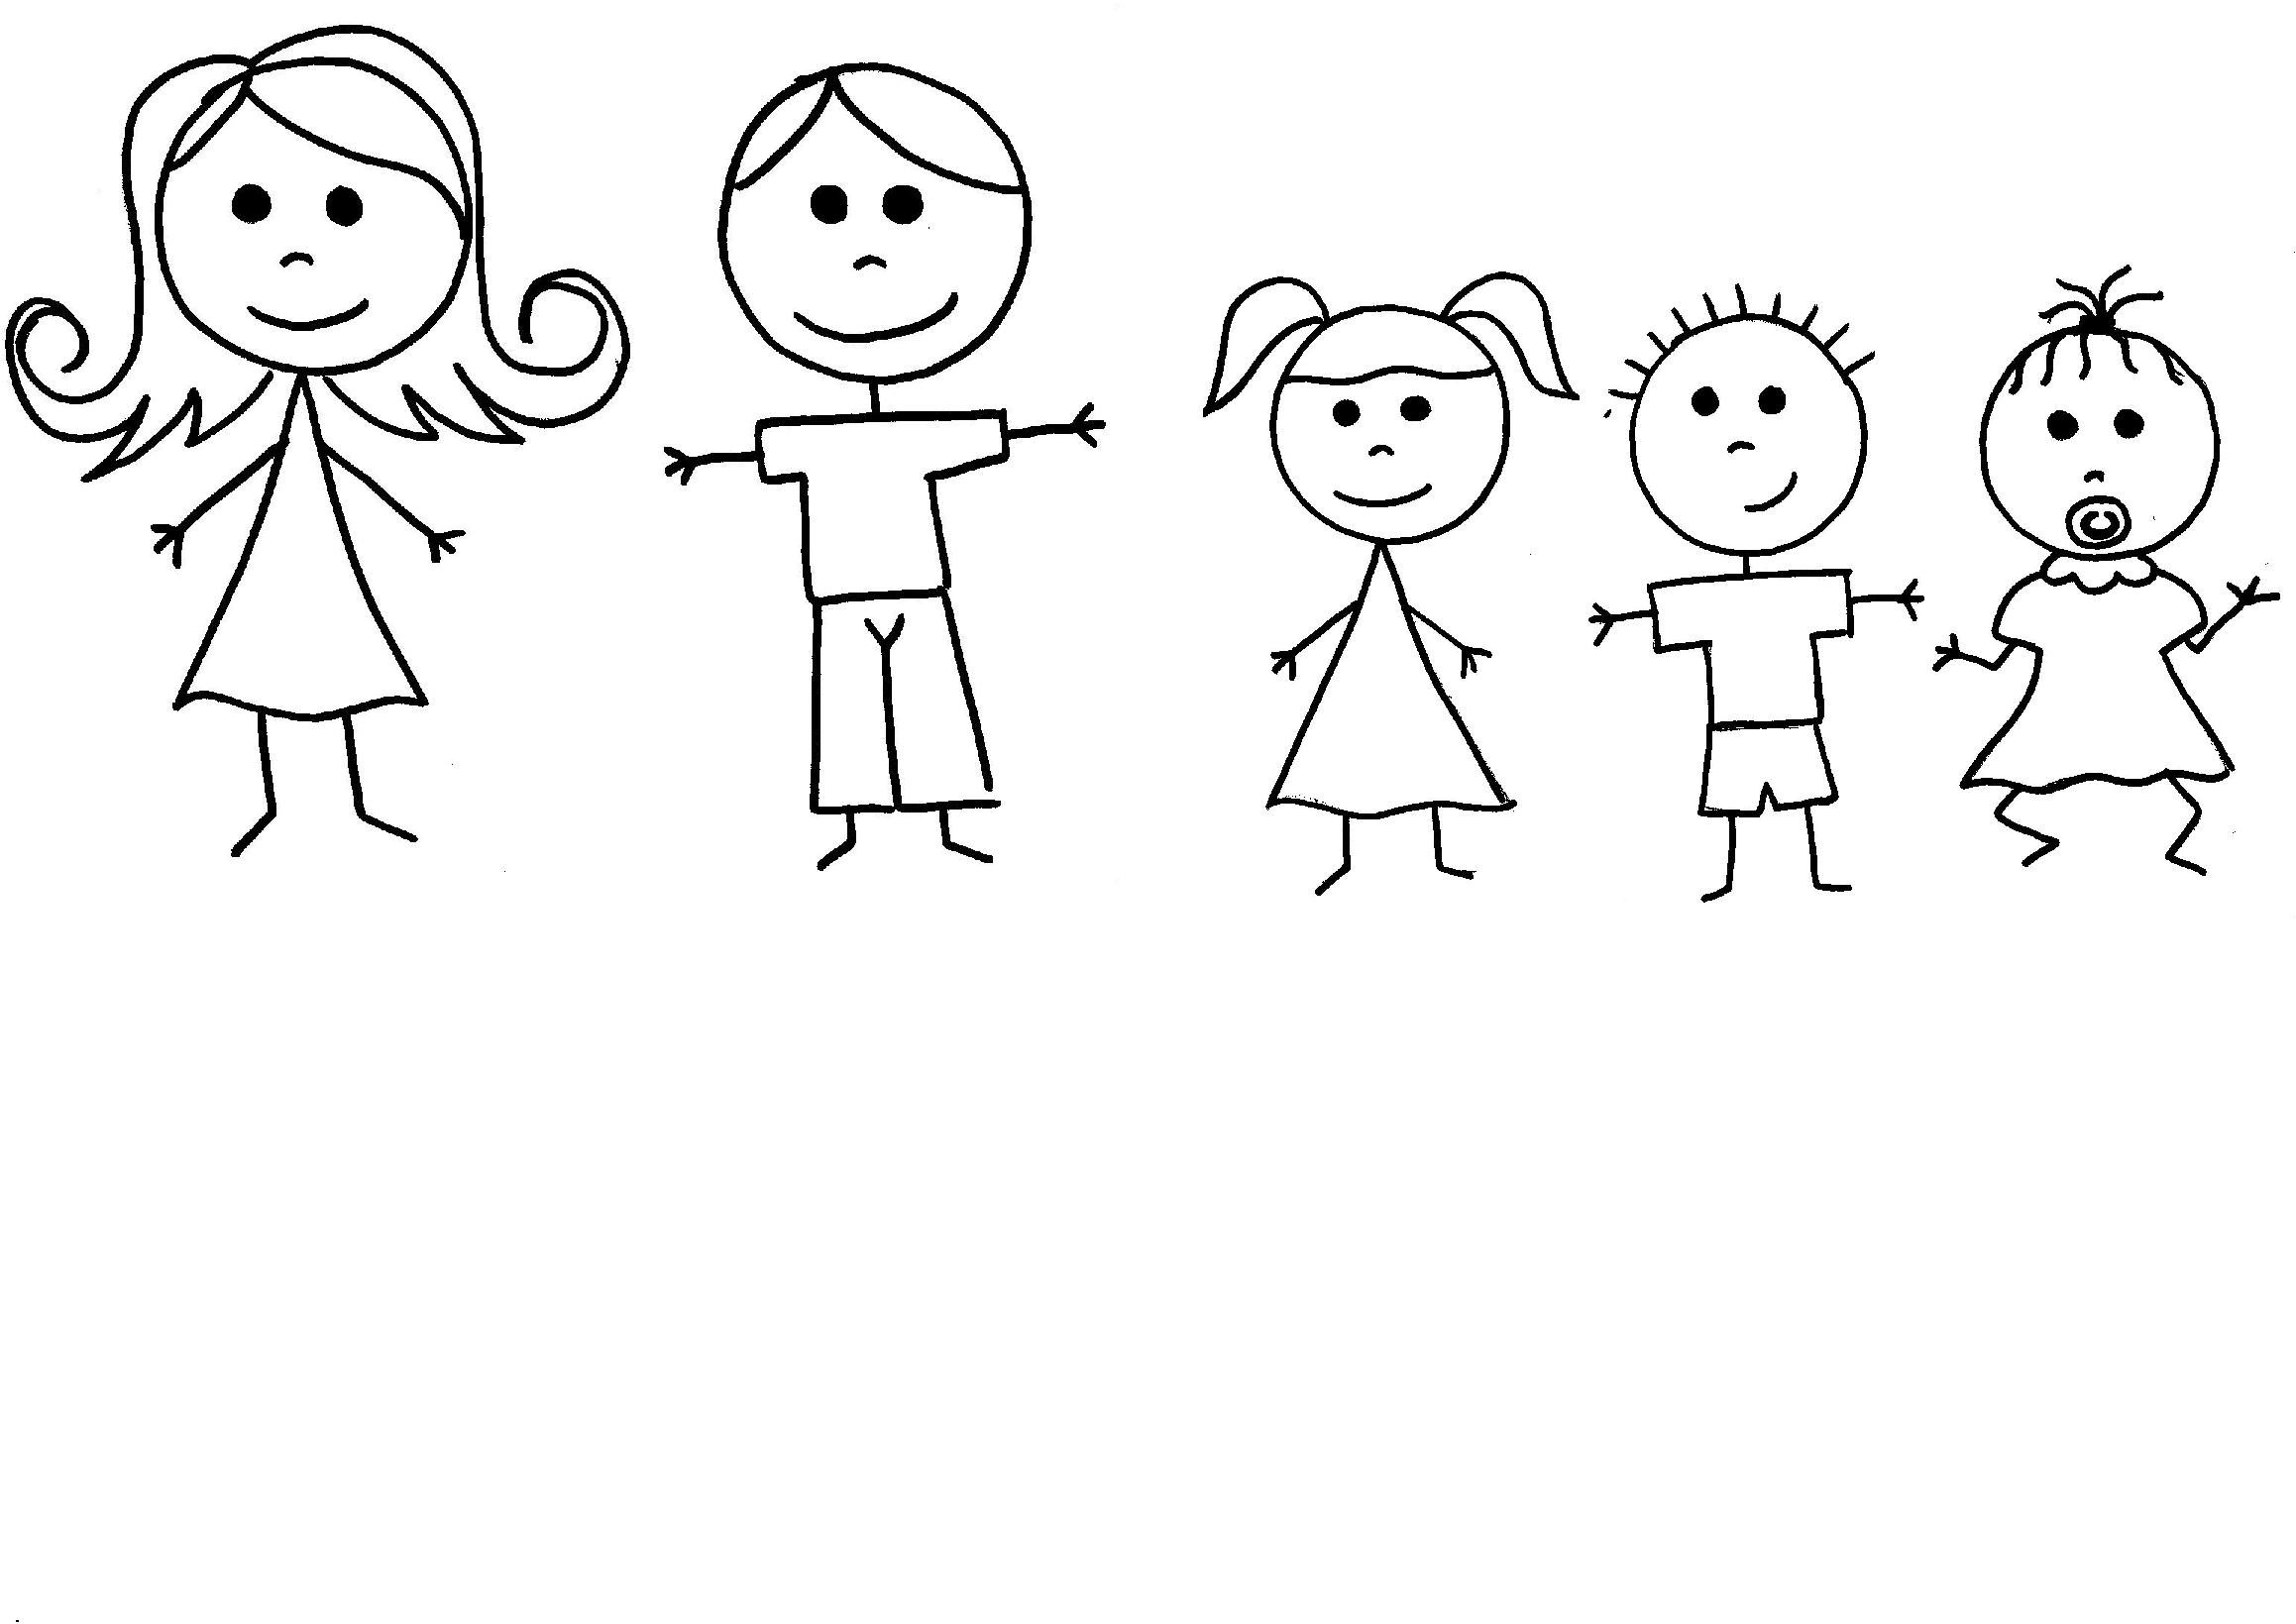 Free Stick Figure Kids Clipart Black And White, Download.